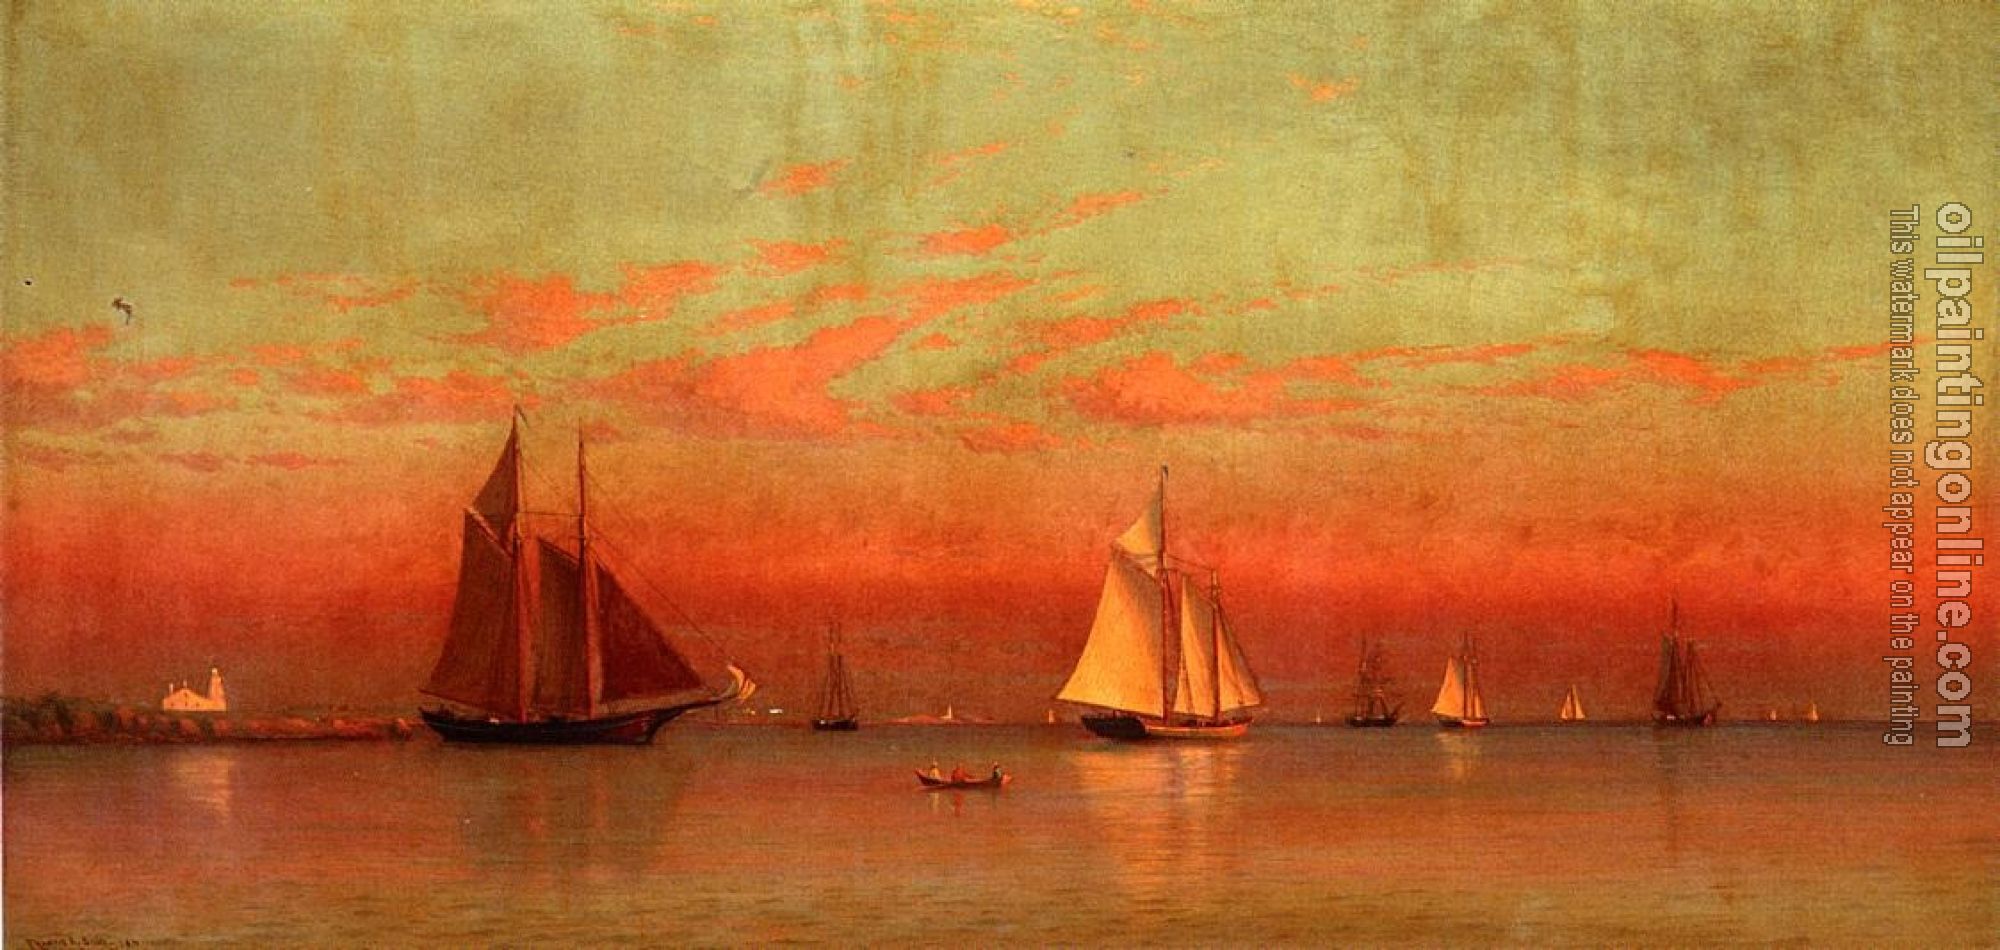 Silva, Francis A - Evening in Gloucester Harbor